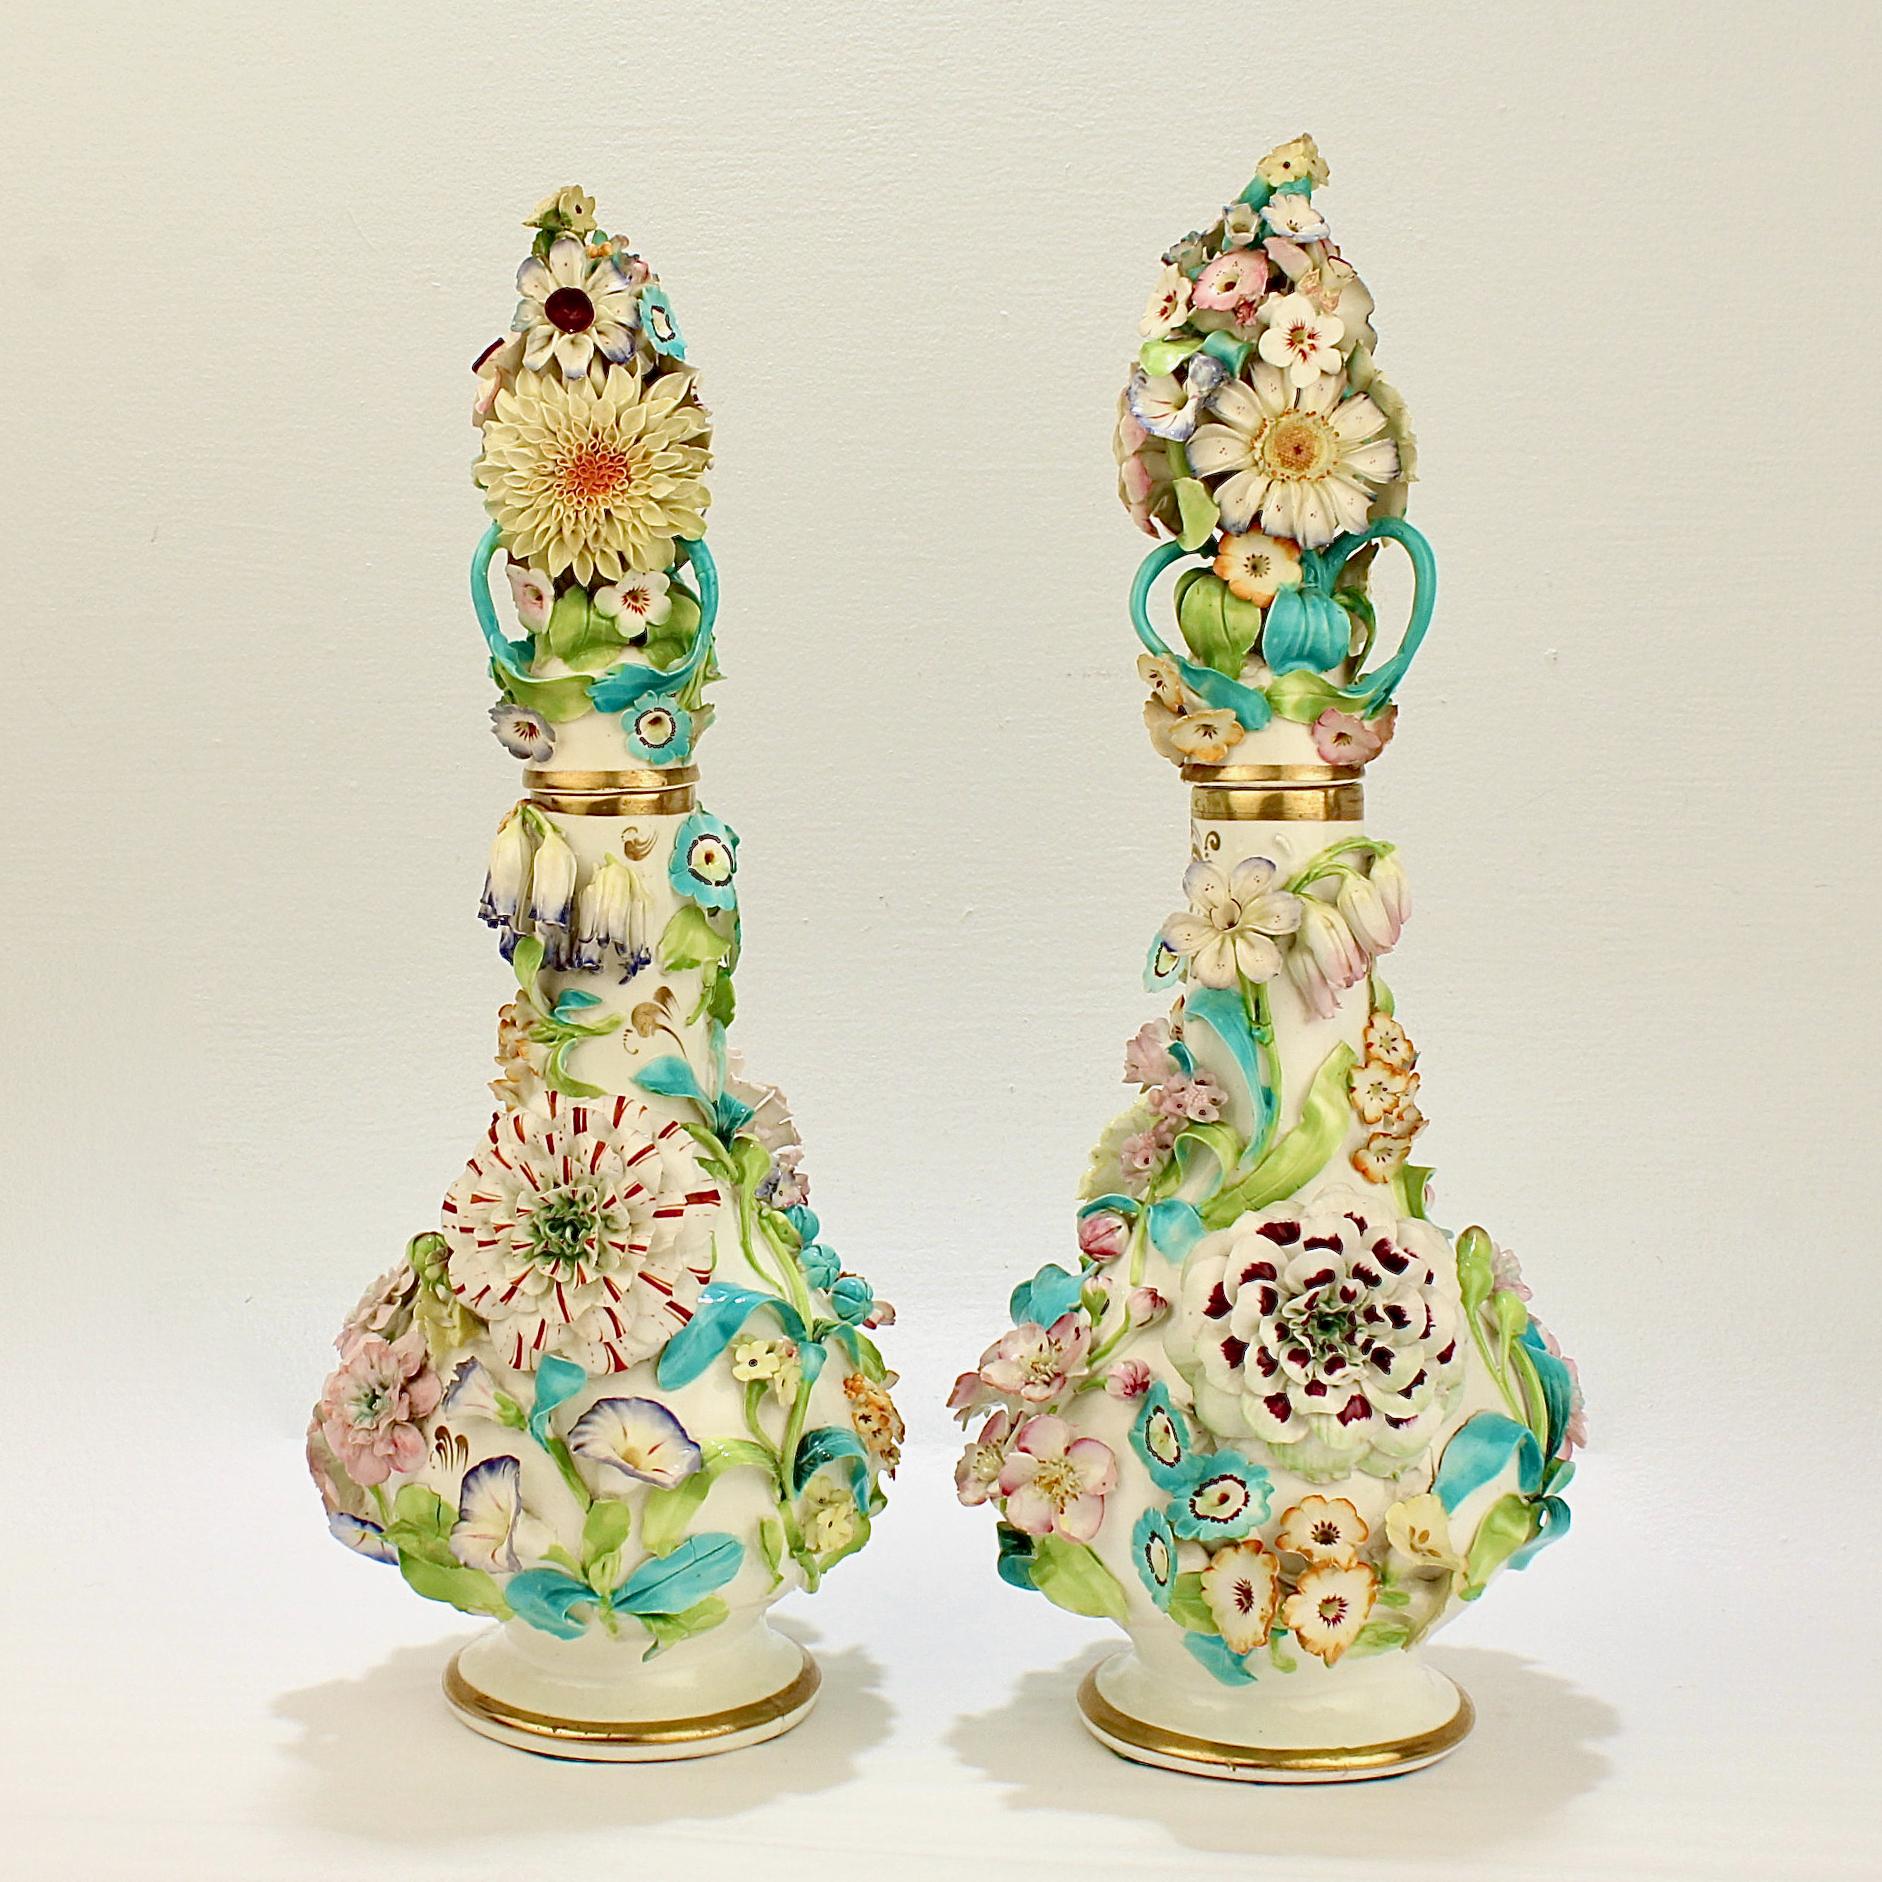 A wonderful pair of very large, early 19th century English porcelain decanters or bottles. 

They are either perfume bottles or lidded vases and have elaborate, full figural flower encrusted decoration throughout. 

The floral encrustation is